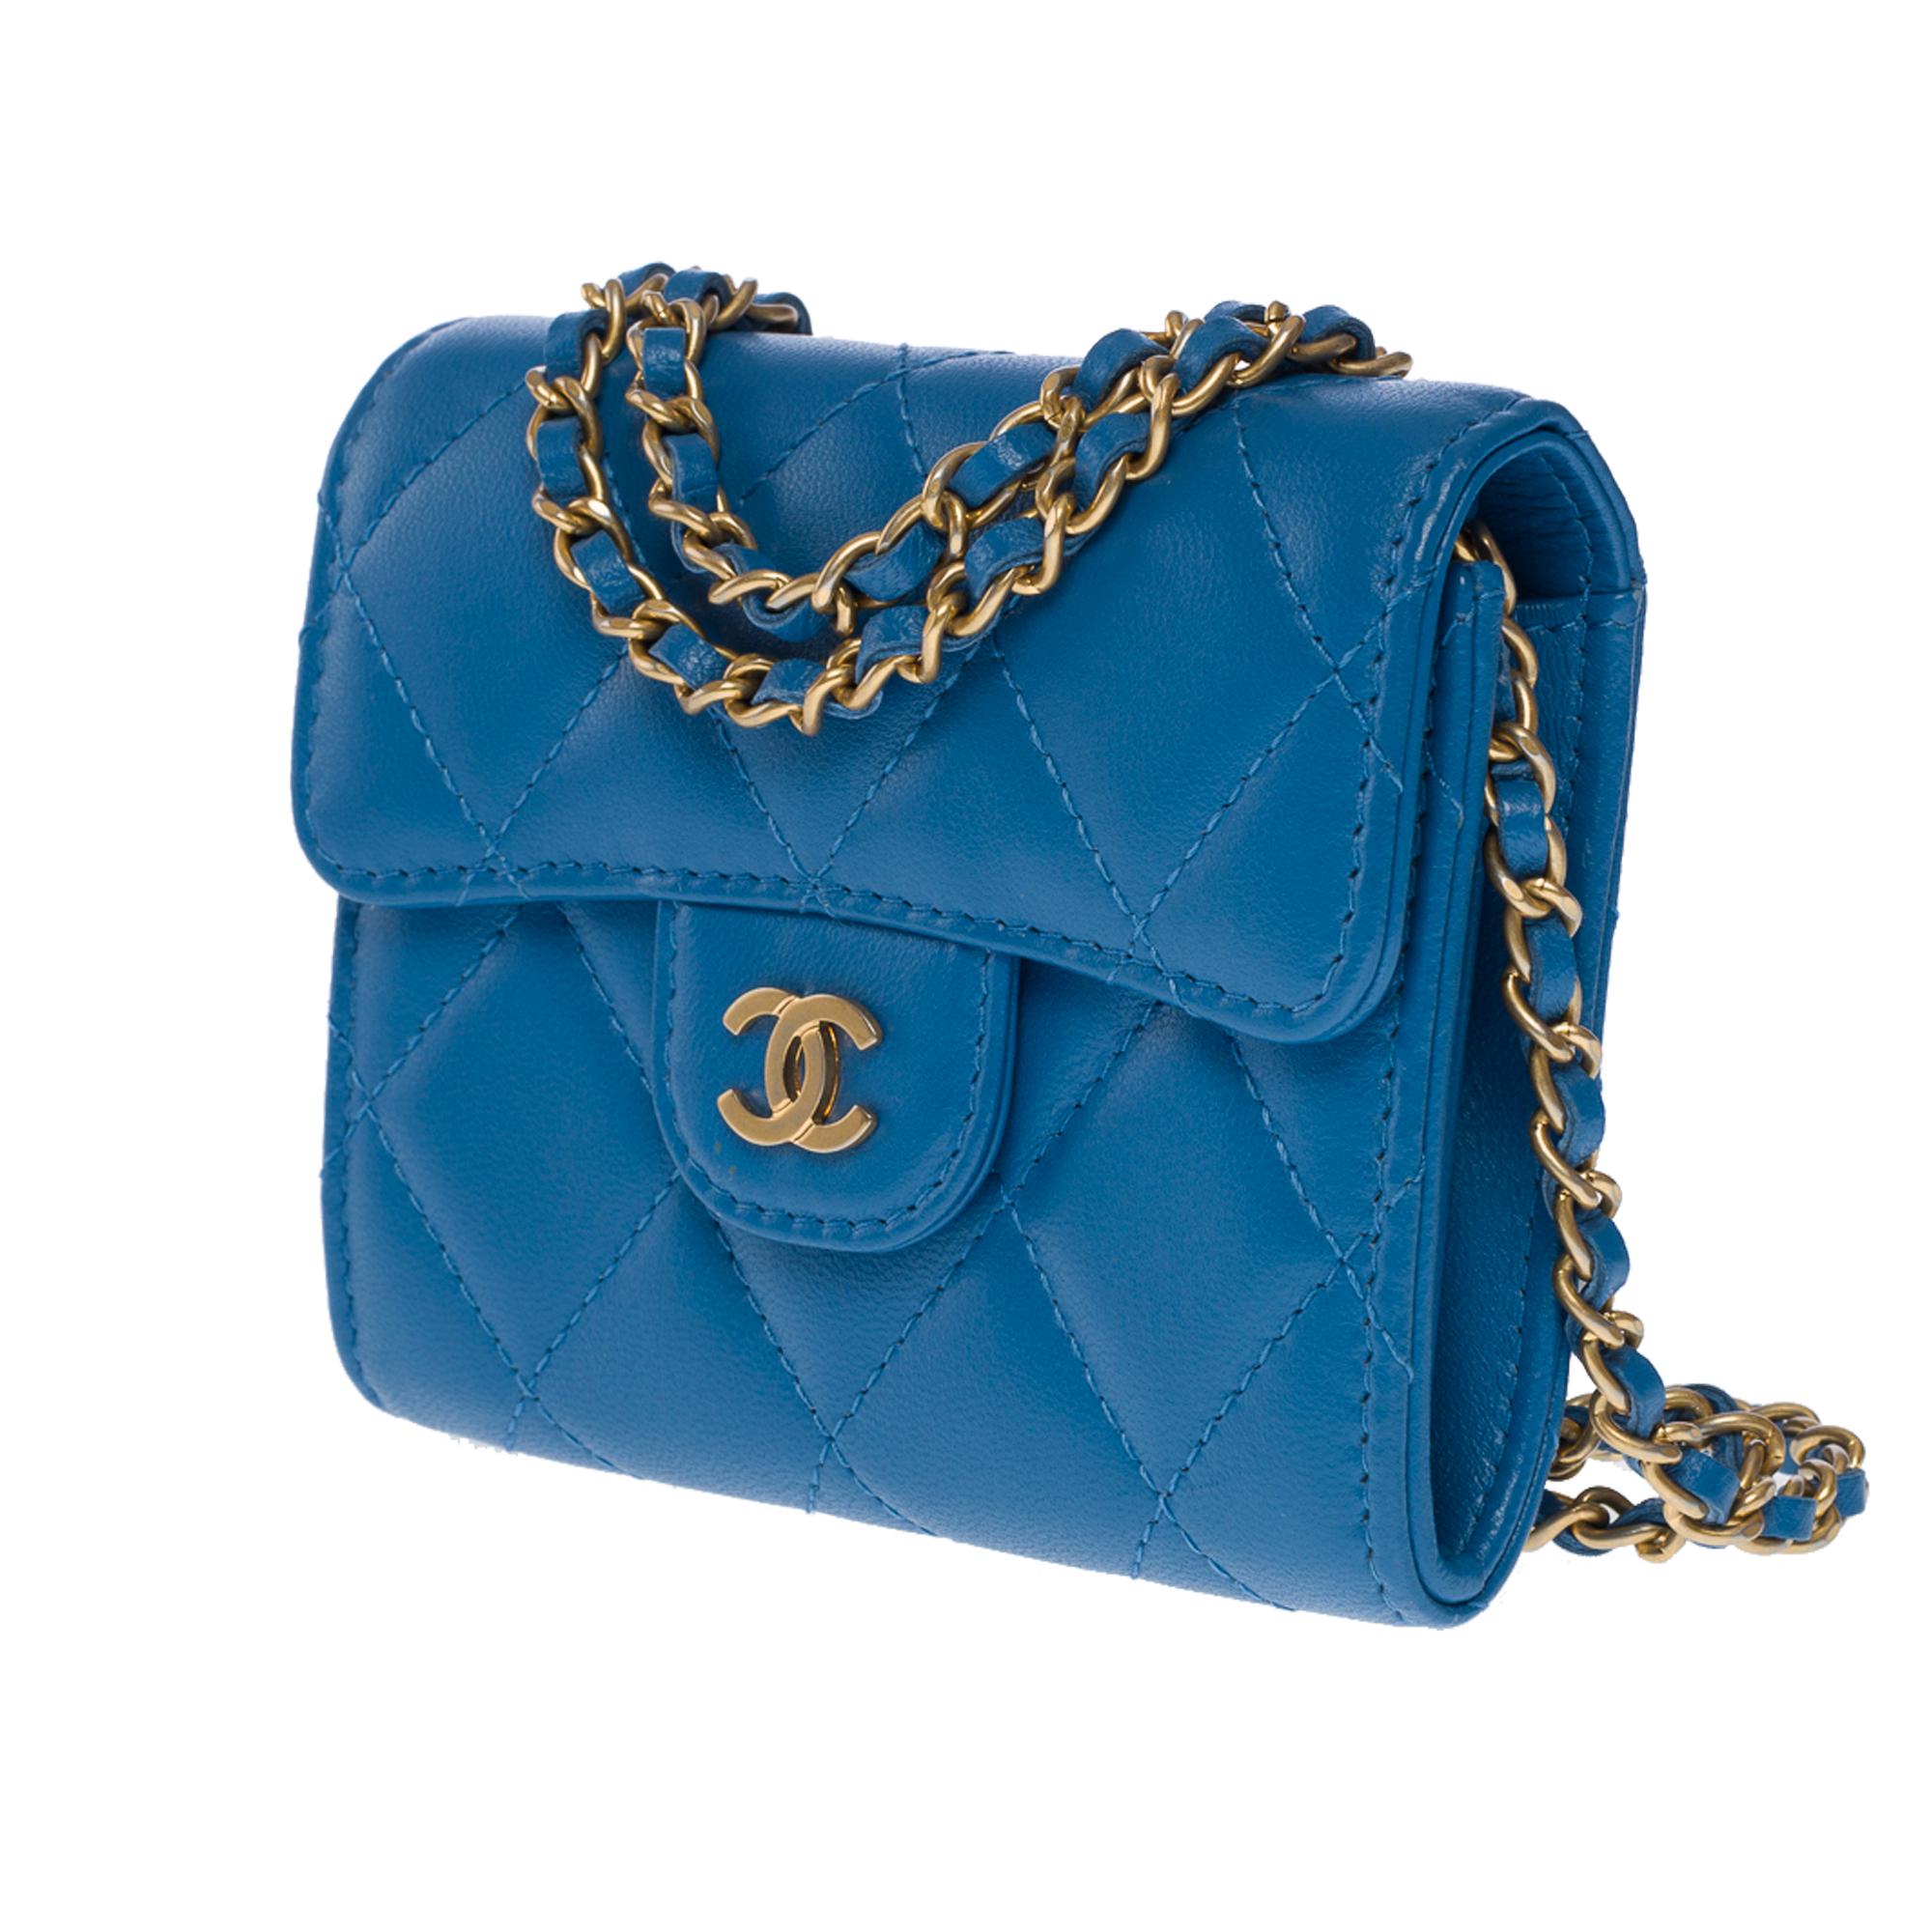 Women's New Chanel Mini Wallet on Chain (WOC)  shoulder bag in blue quilted leather, GHW